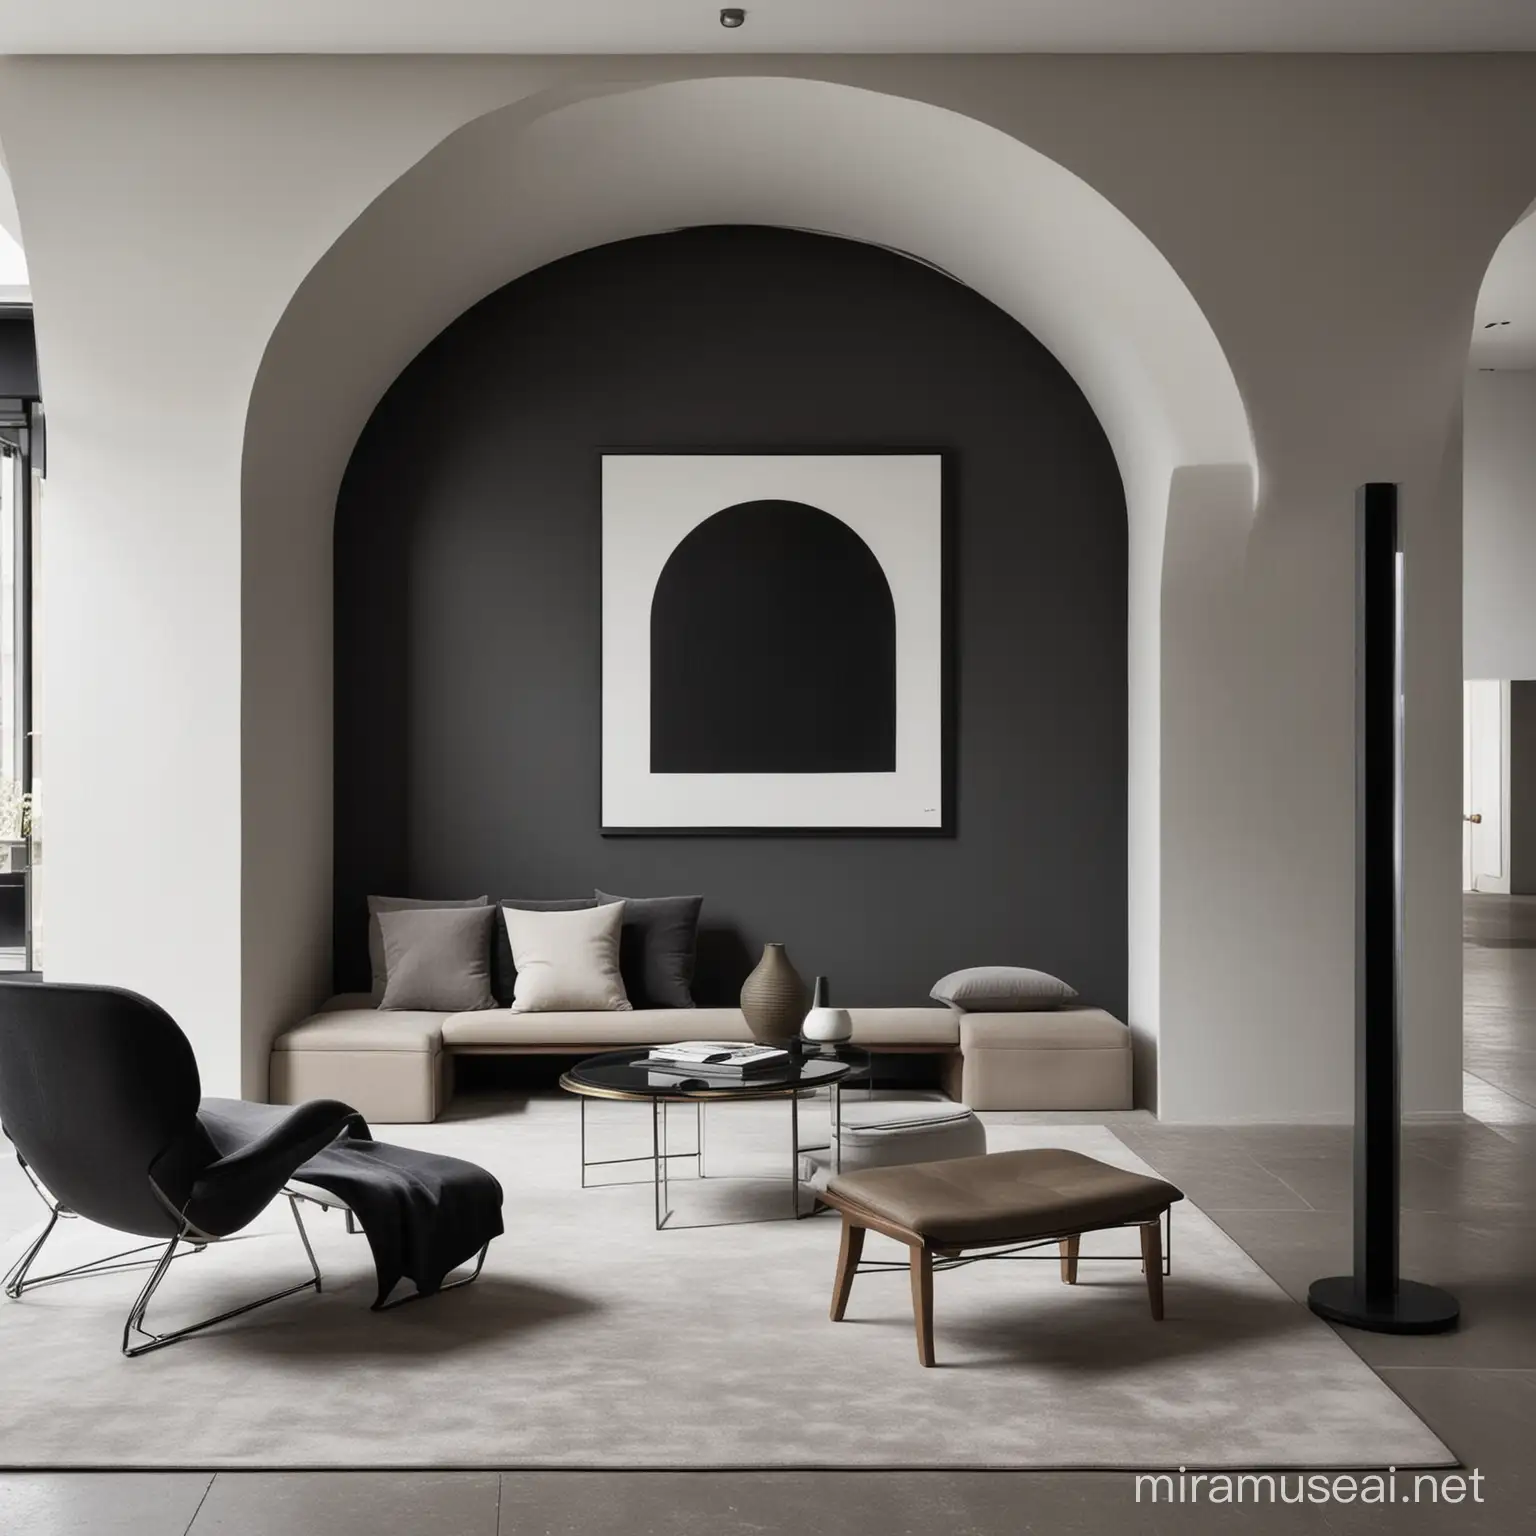 Contemporary Art Gallery Interior with GreyBlack Walls and Architectural Accents